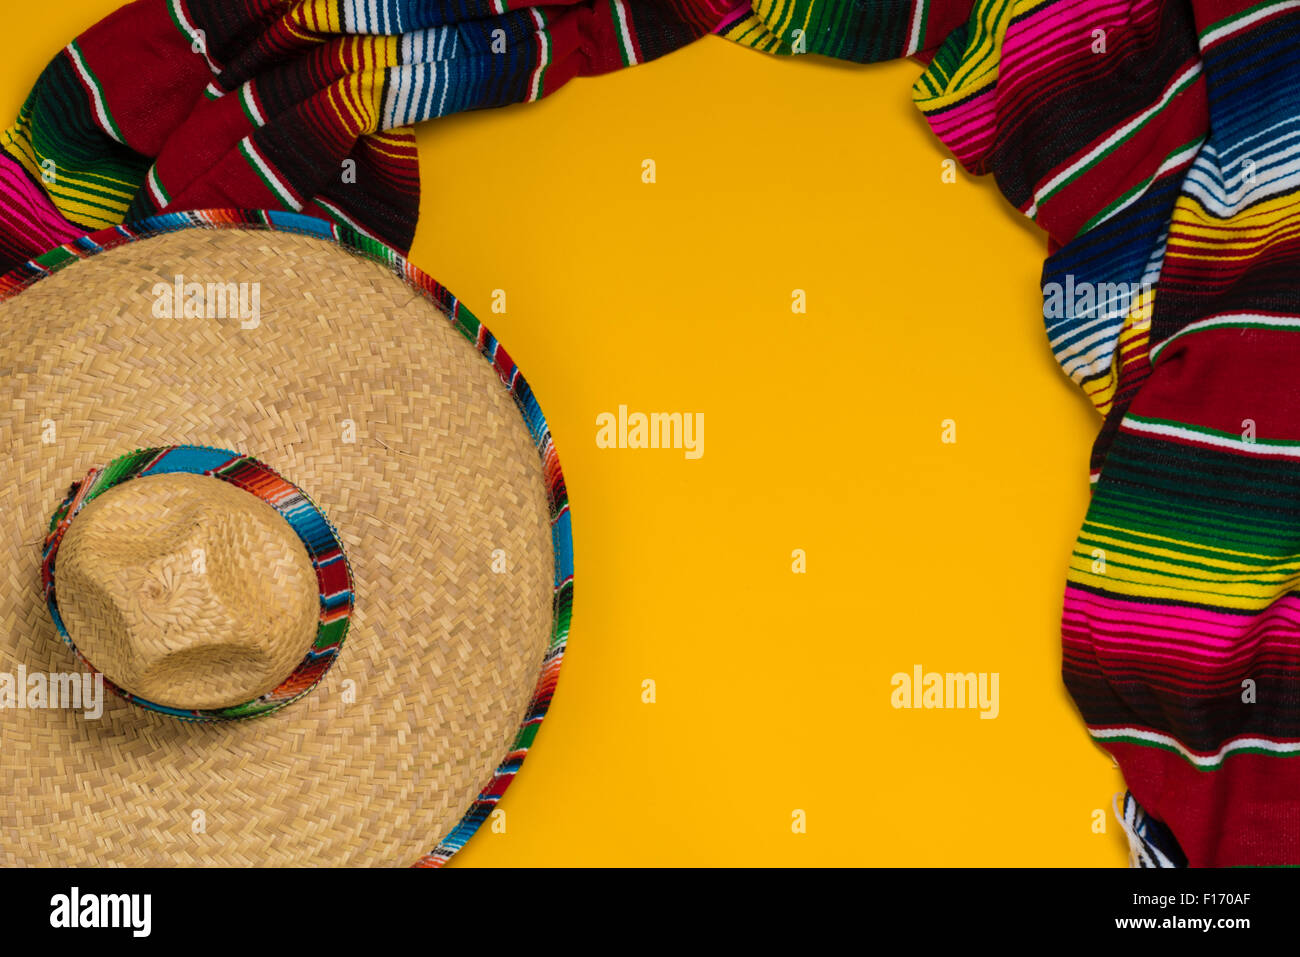 A traditional Mexican Sombrero and serape blanket on a yellow background with copy space Stock Photo